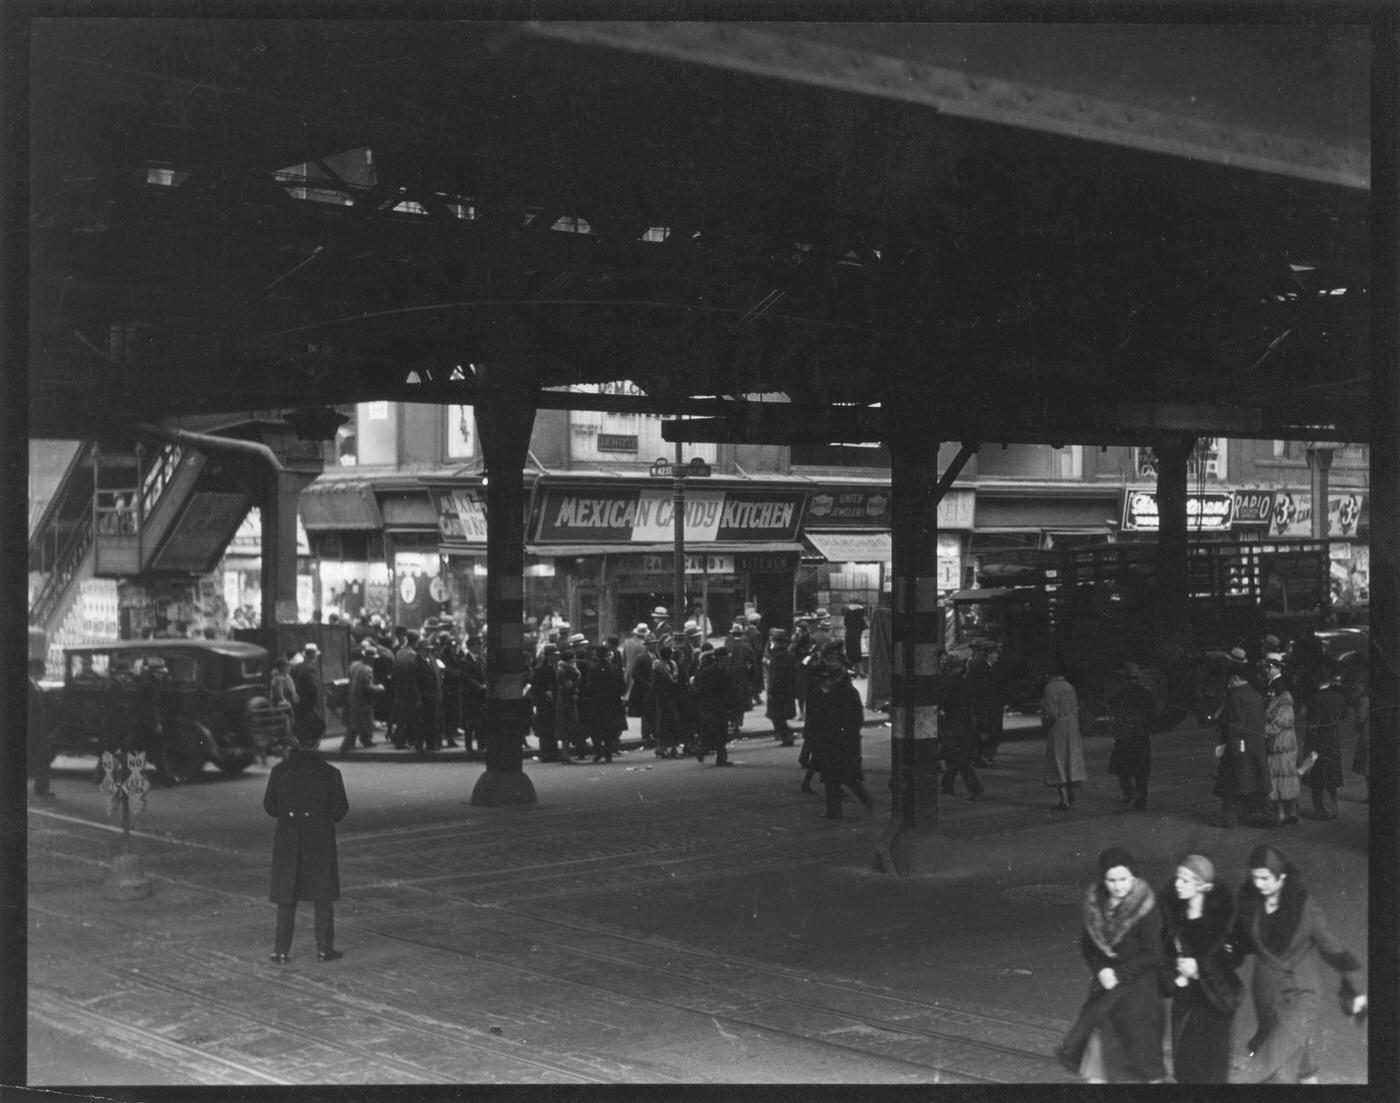 Sixth Avenue And 42Nd Street Under Elevated Railroad, Mexican Candy Kitchen On Corner, Manhattan, 1929